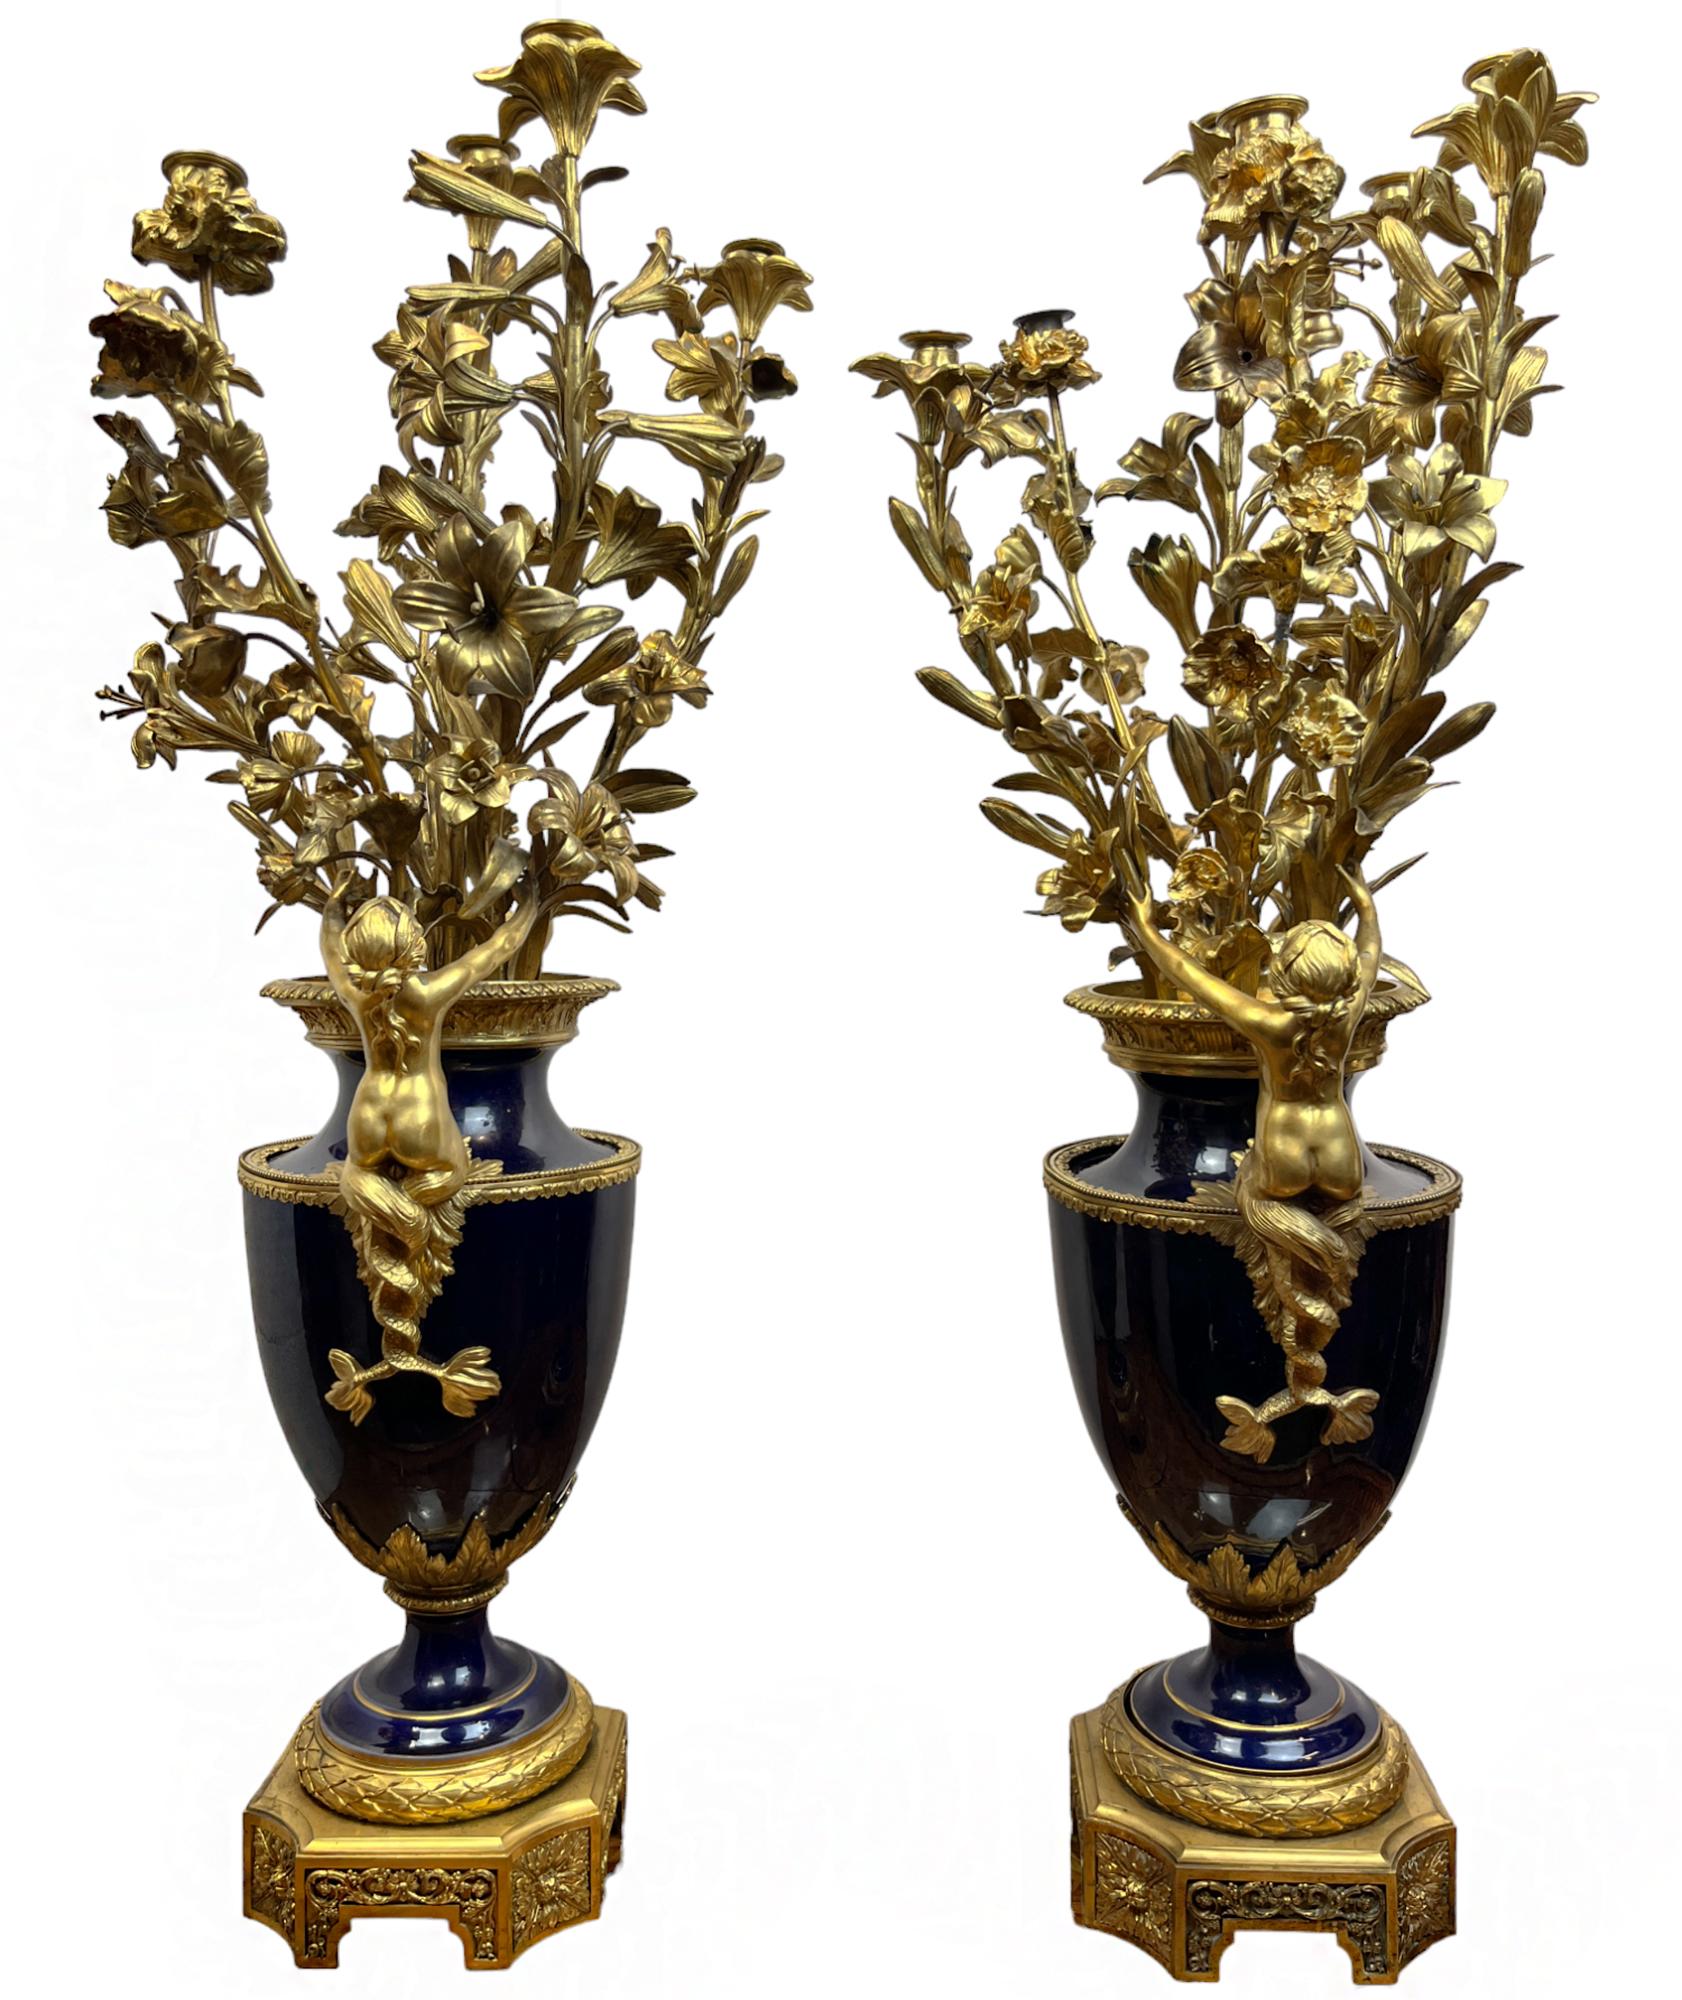 19th Century Pair Of Ormolu Mounted Sèvres-style Bouquet Candelabras For Sale